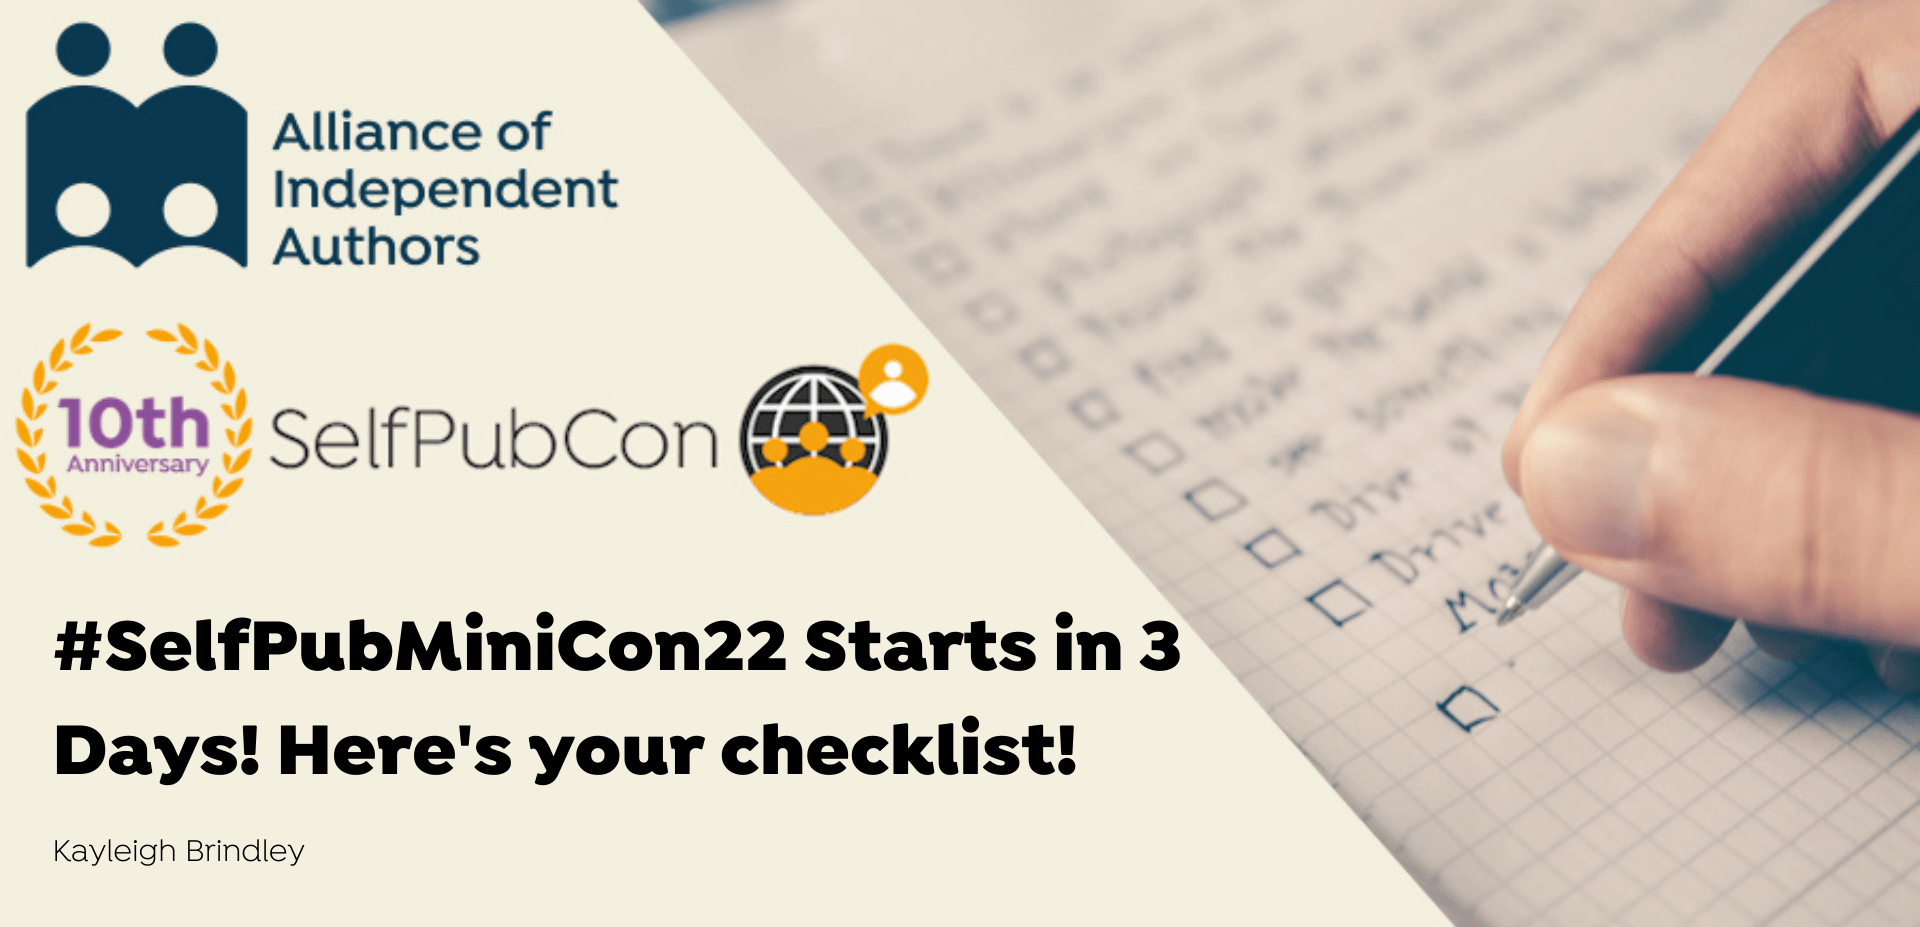 #SelfPubMiniCon22 Starts In 3 Days! Here's Your Checklist!